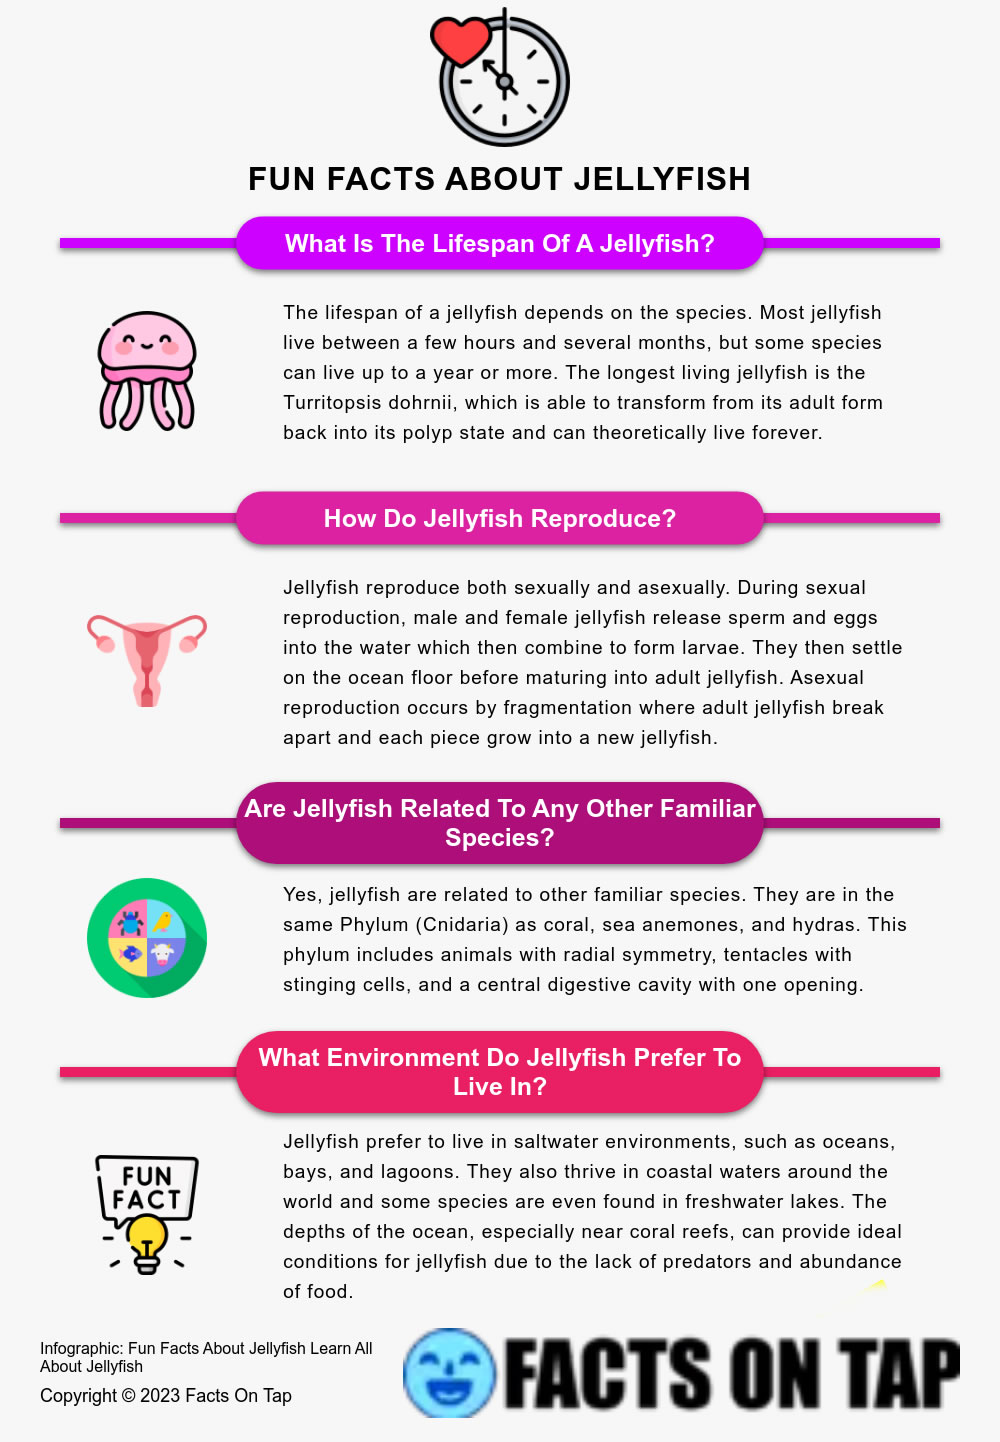 Jellyfish Facts Infographic